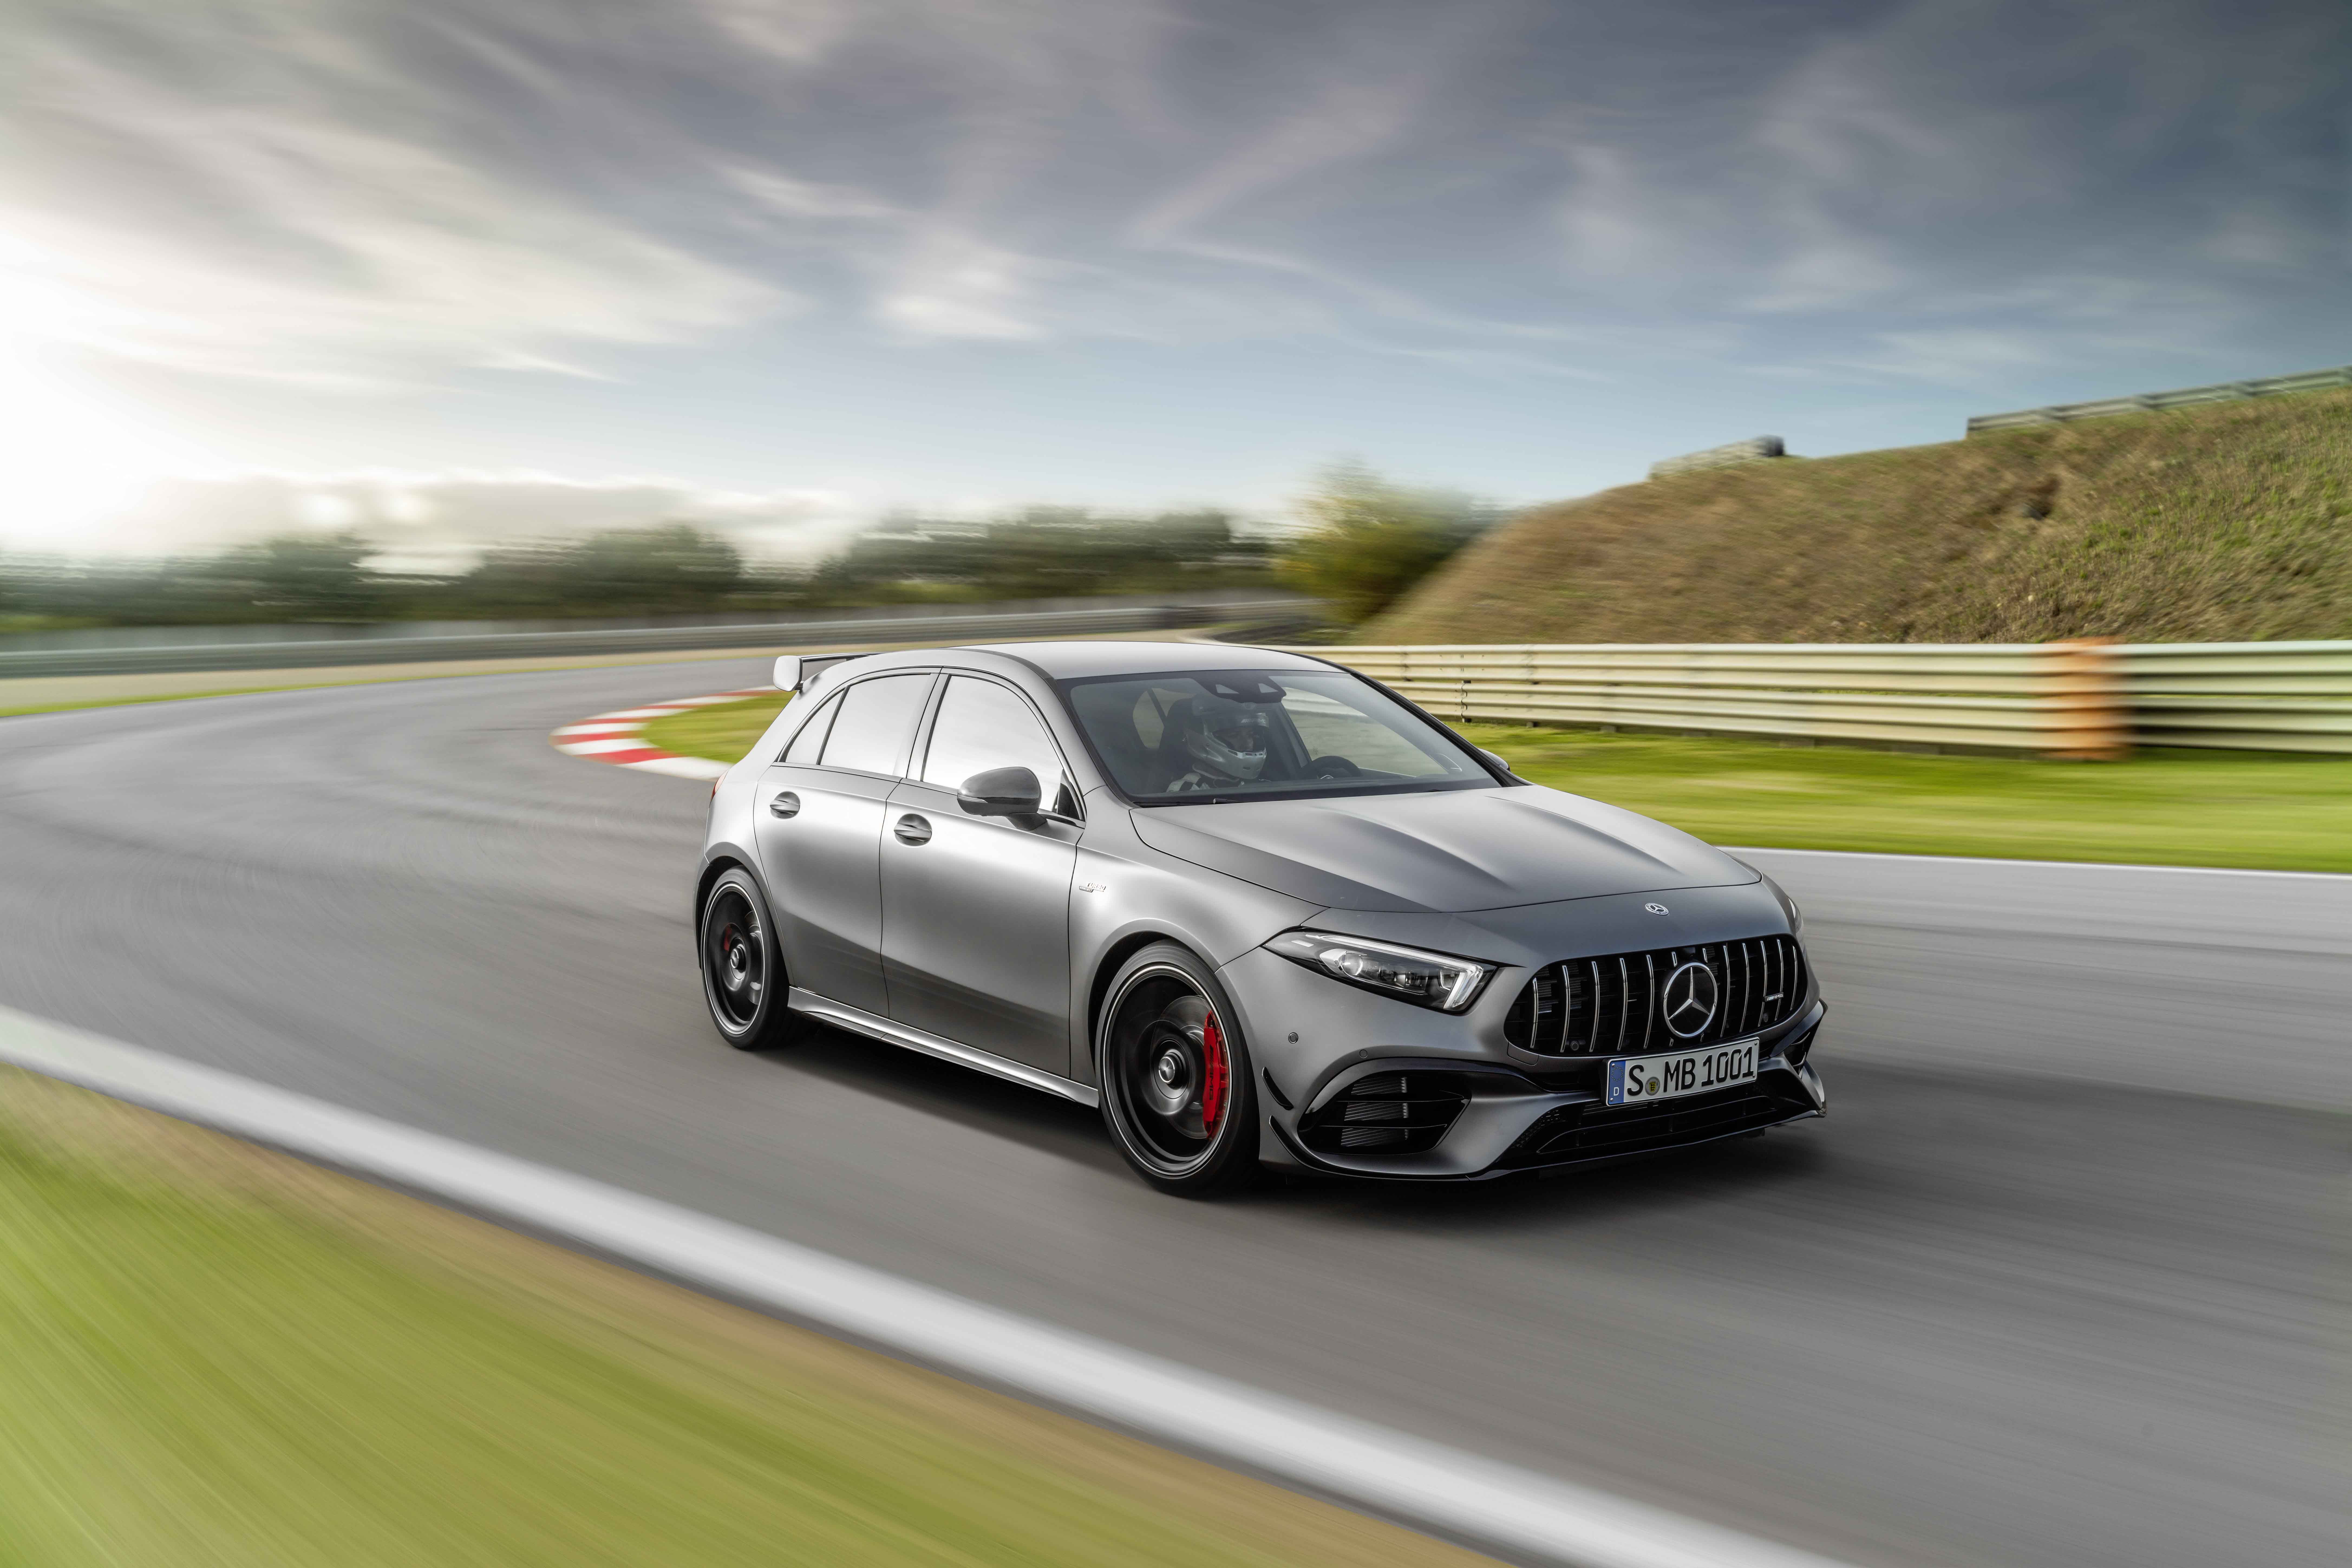 Mercedes Amg A45 S Driving On Racetrack 